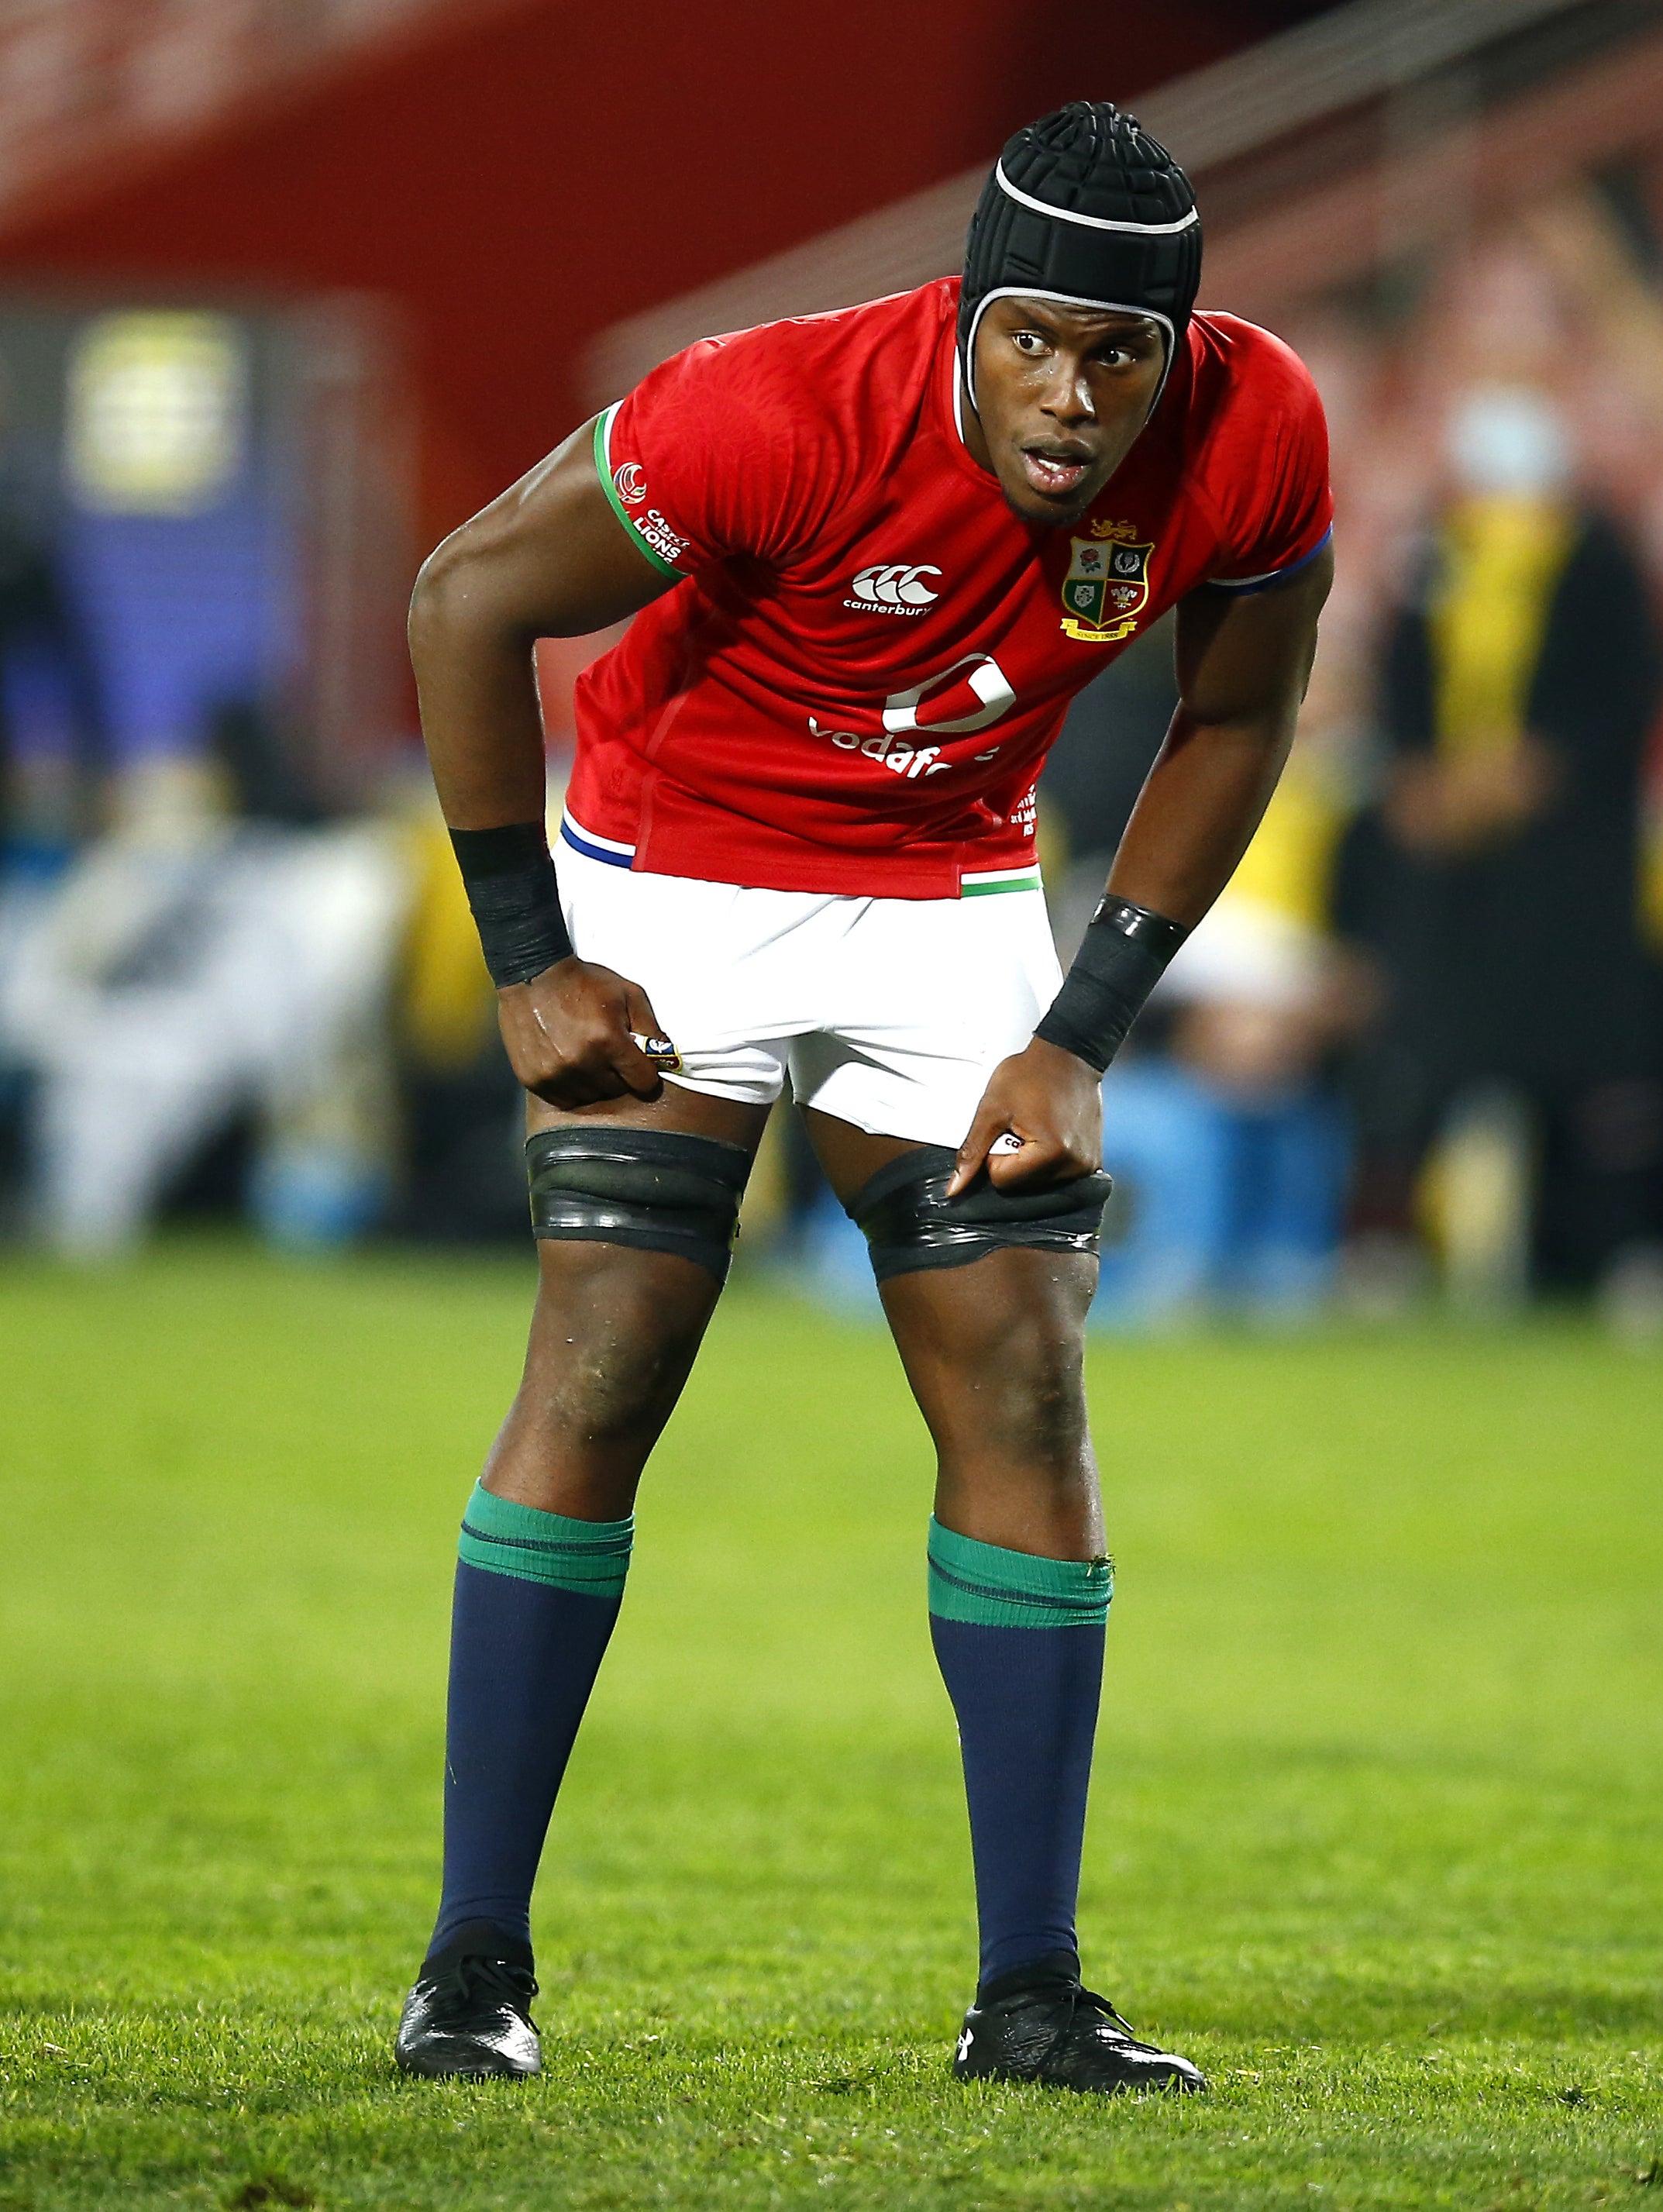 Maro Itoje was man of the match in the first Test (Steve Haag/PA)